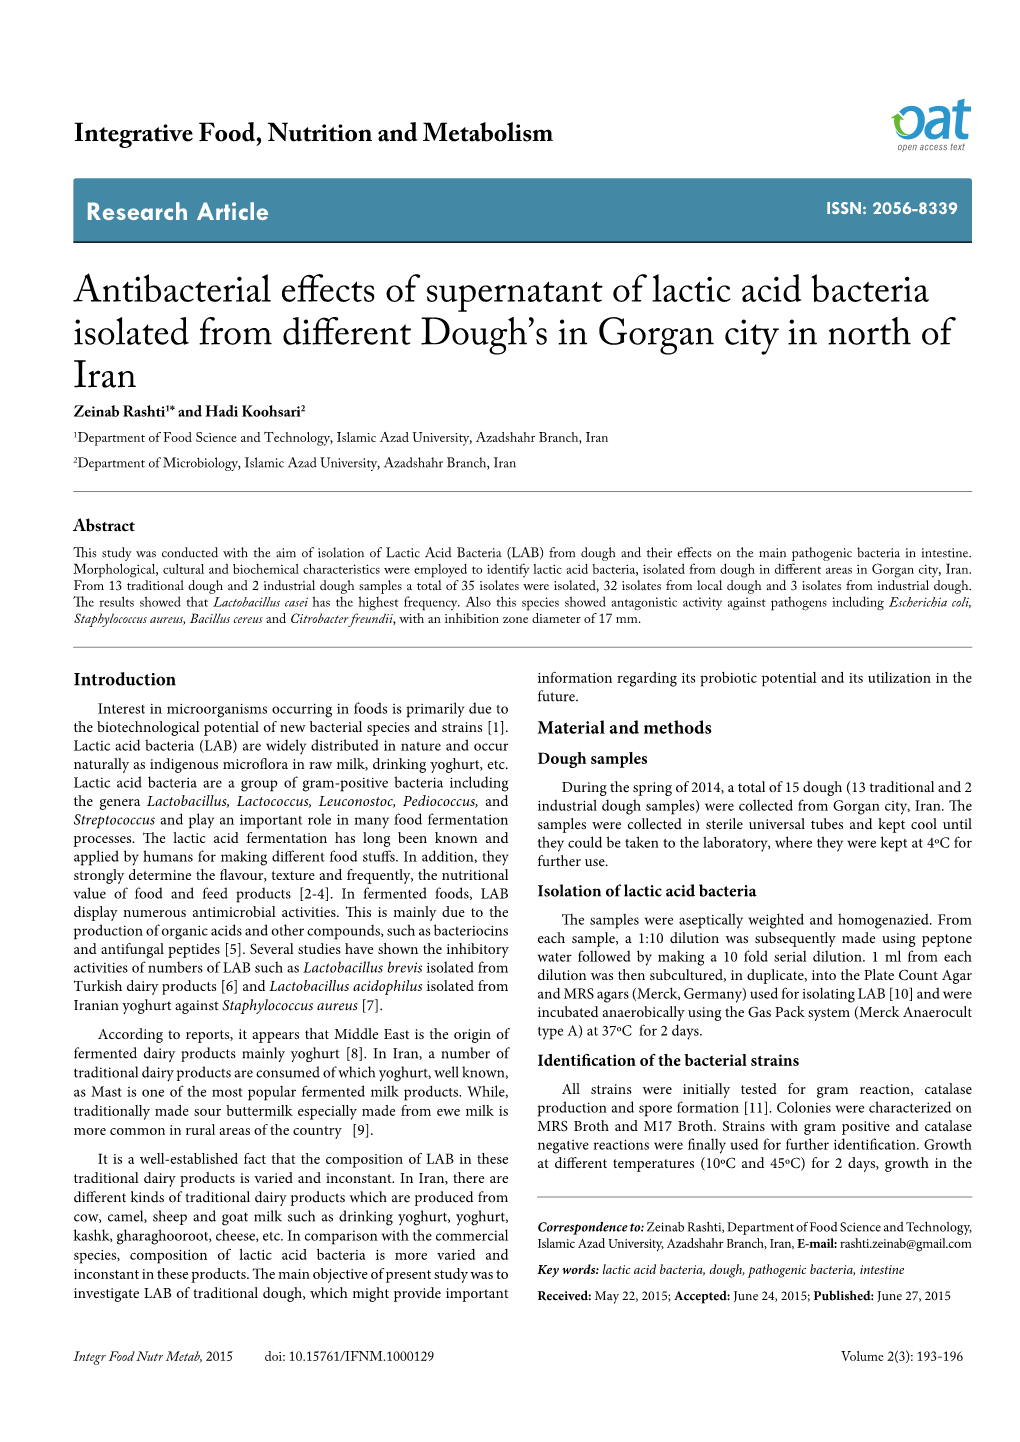 Antibacterial Effects of Supernatant of Lactic Acid Bacteria Isolated from Different Dough's in Gorgan City in North of Iran